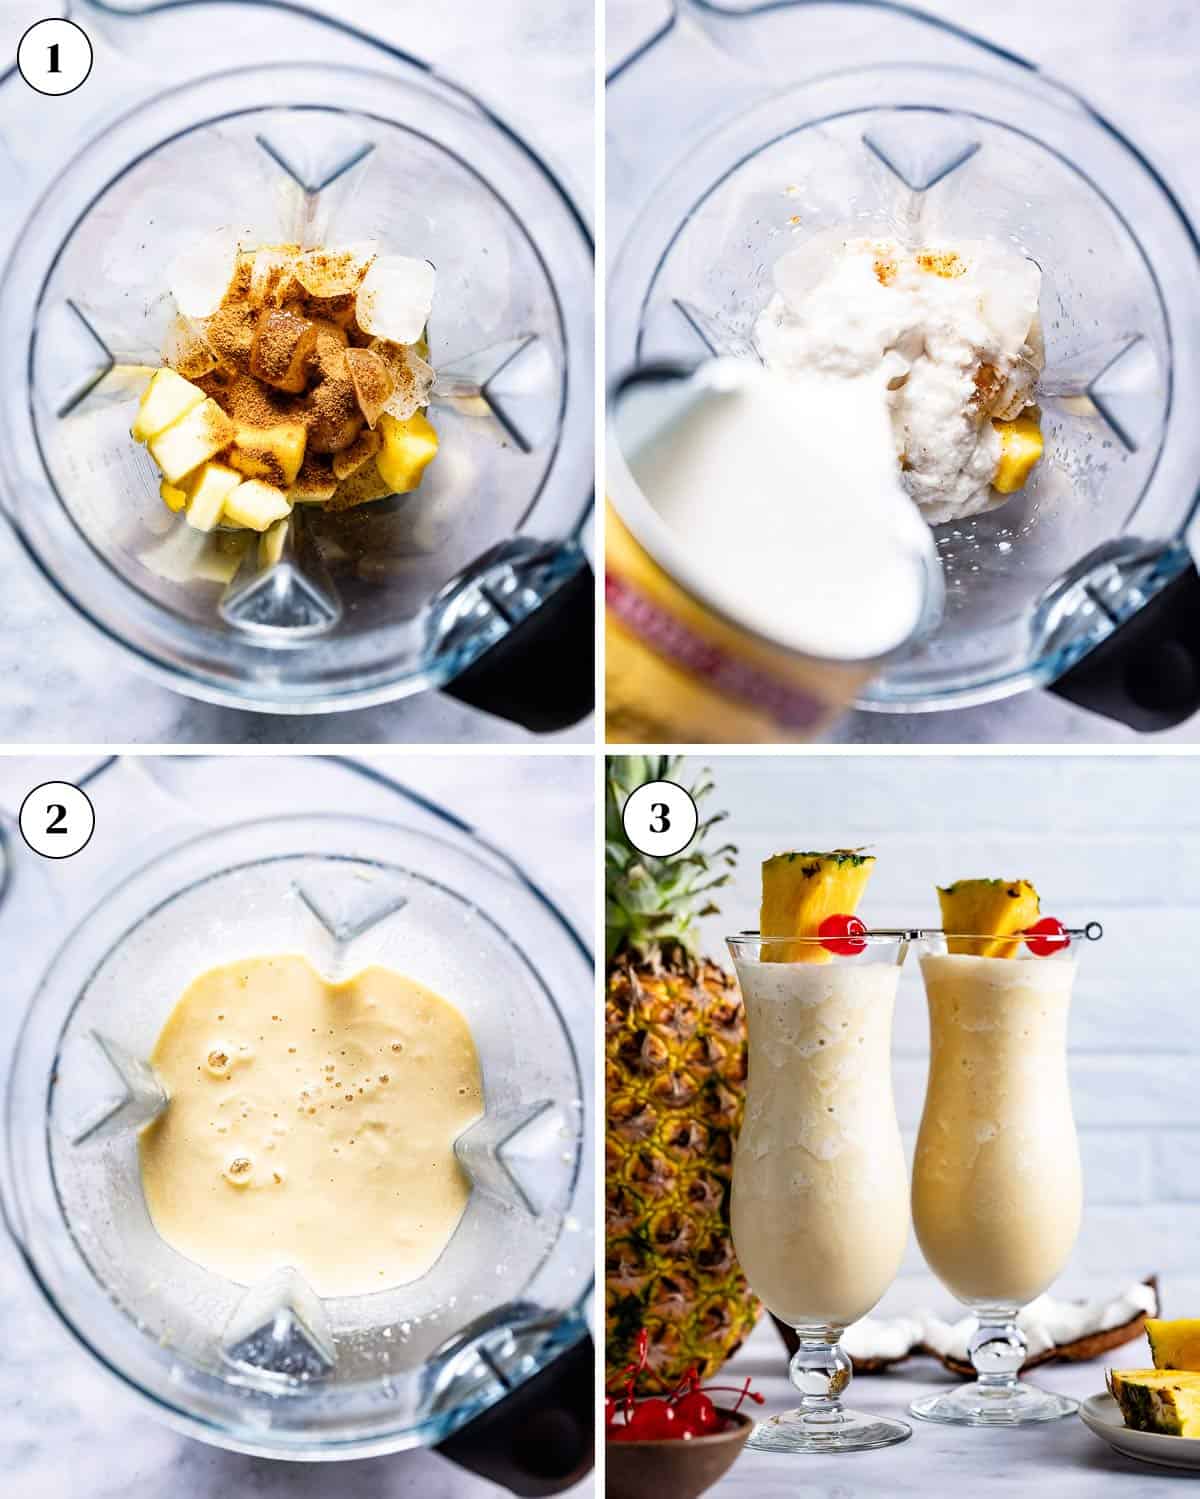 A collage of images showing how to make virgin pina colada.